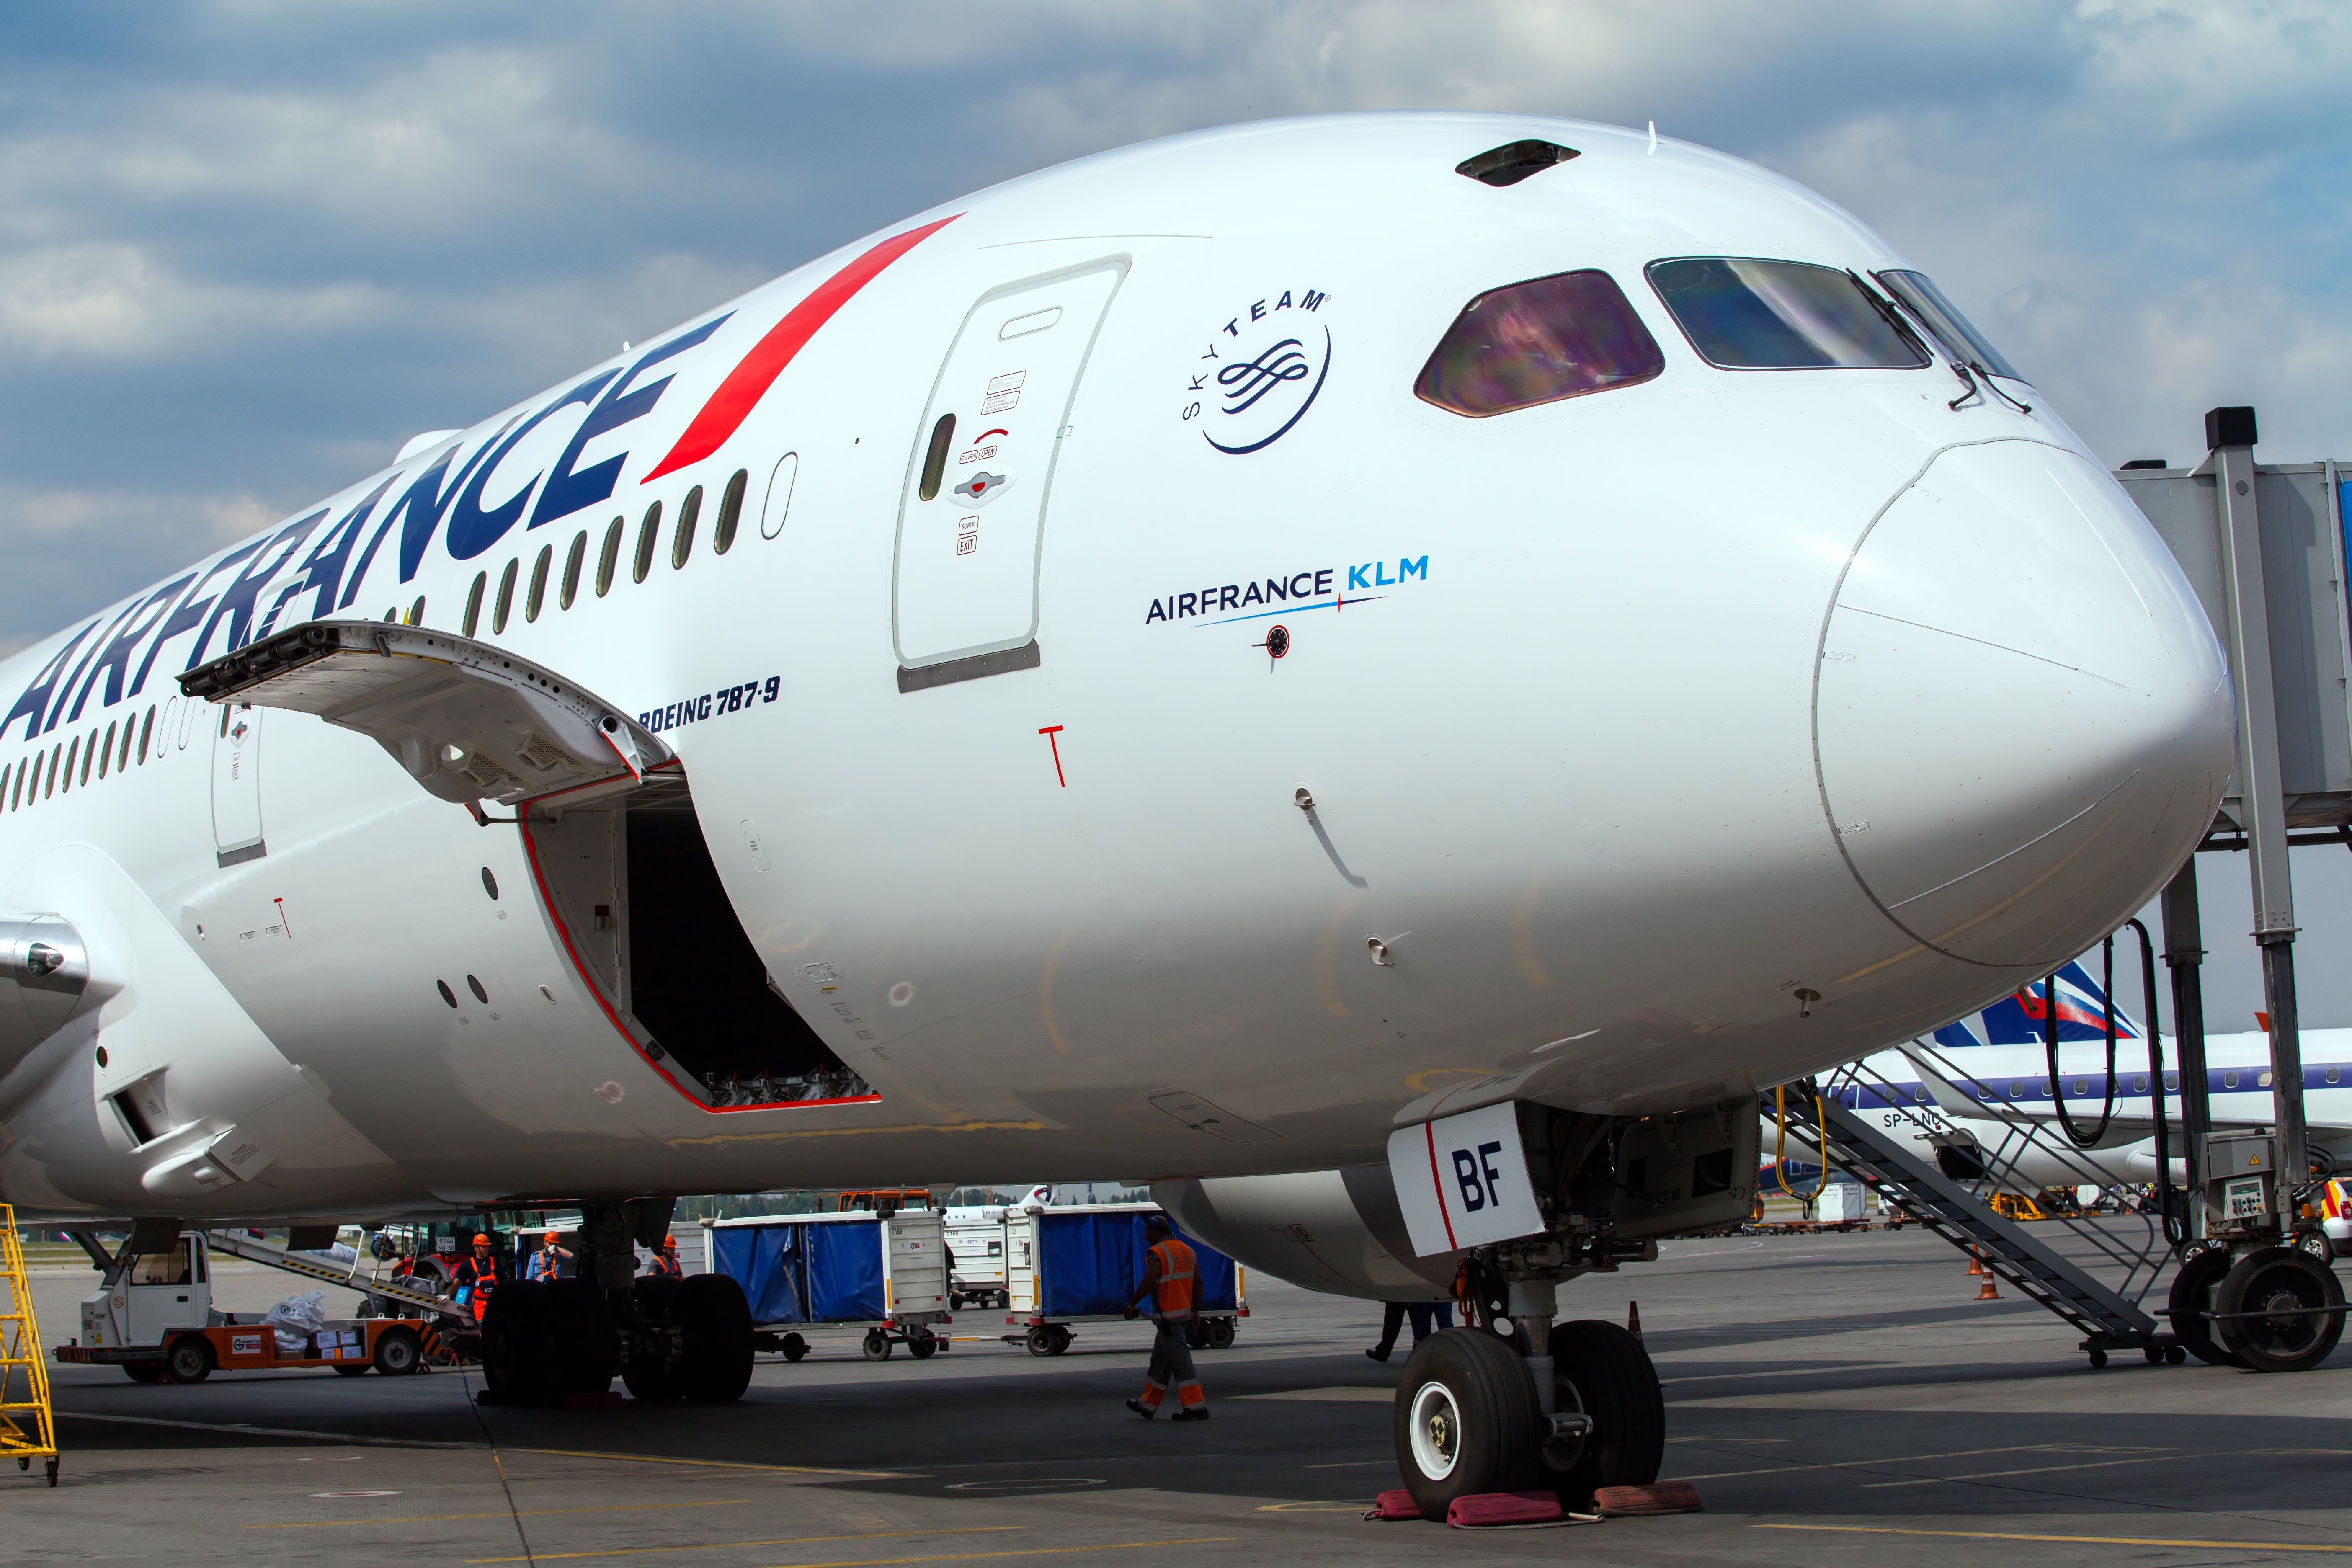 An Air France Boeing 787-9 parked at the gate.